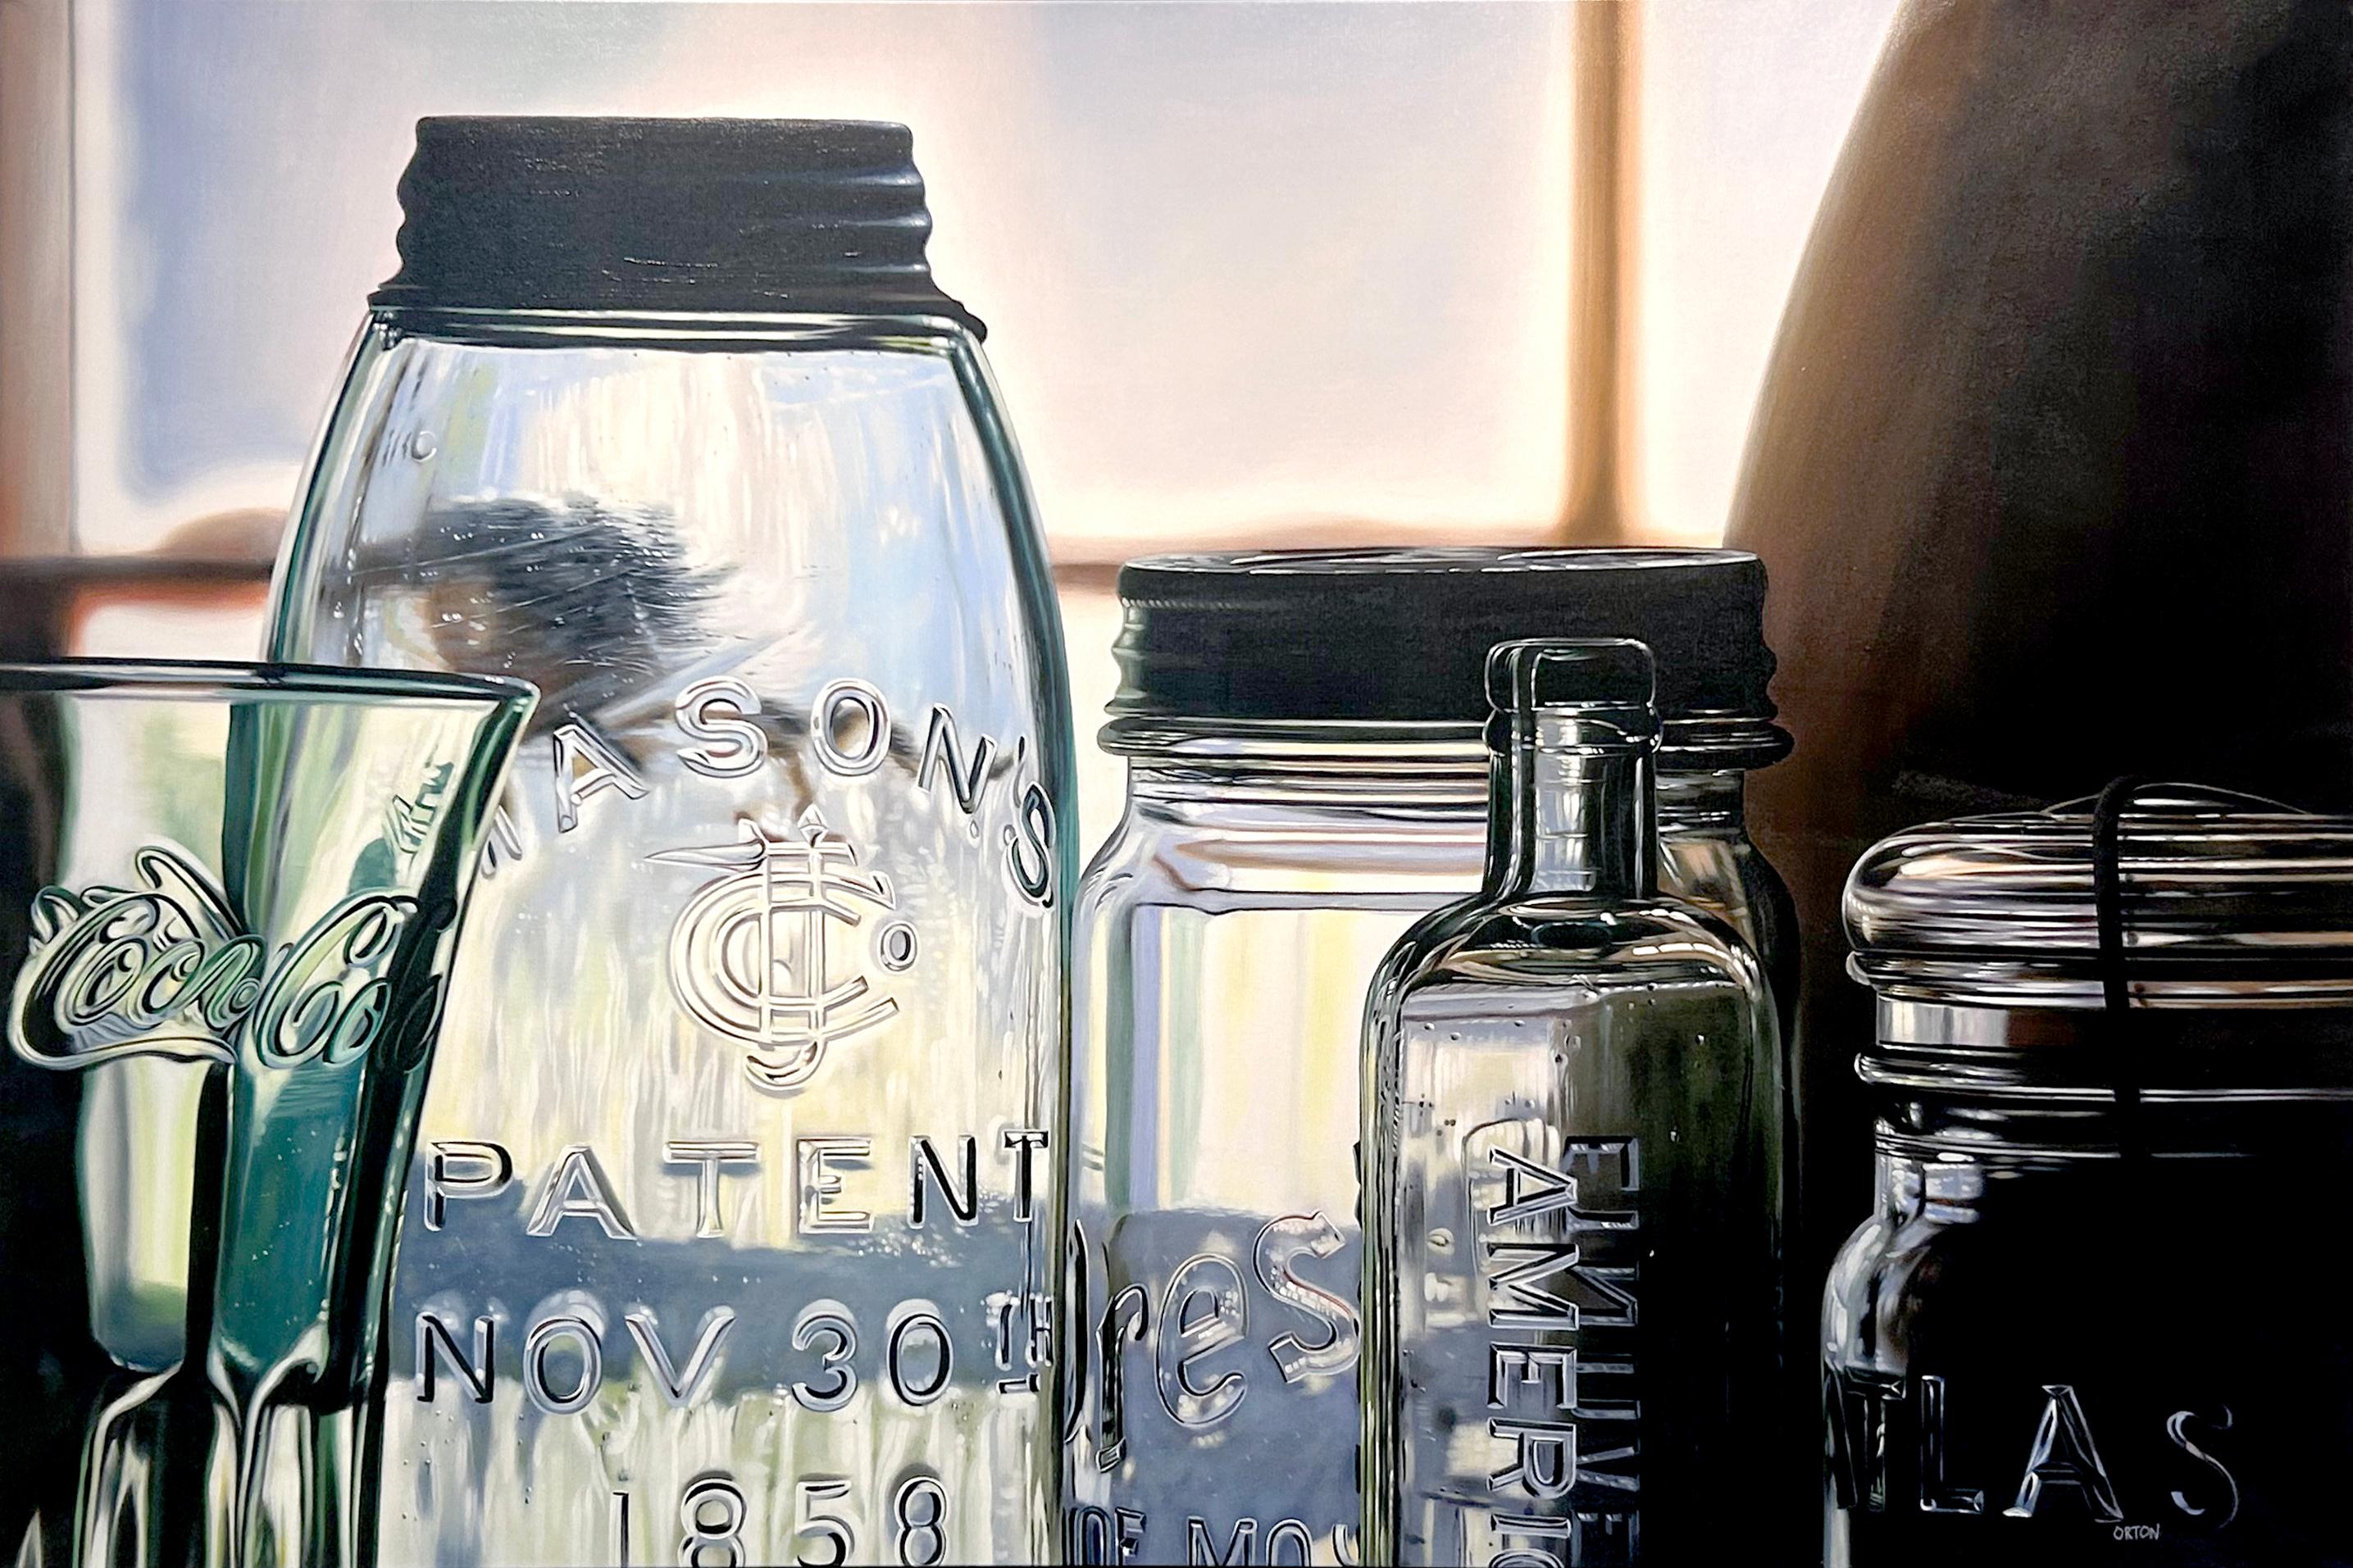 Ken Orton's "Patent Image" is a 40x60 original oil painting on canvas. This painting depicts a still life setting featuring a grouping of crystal clear jars and bottles. Included in the glass collection are a Coca Cola glass, Presto jar, Mason jar